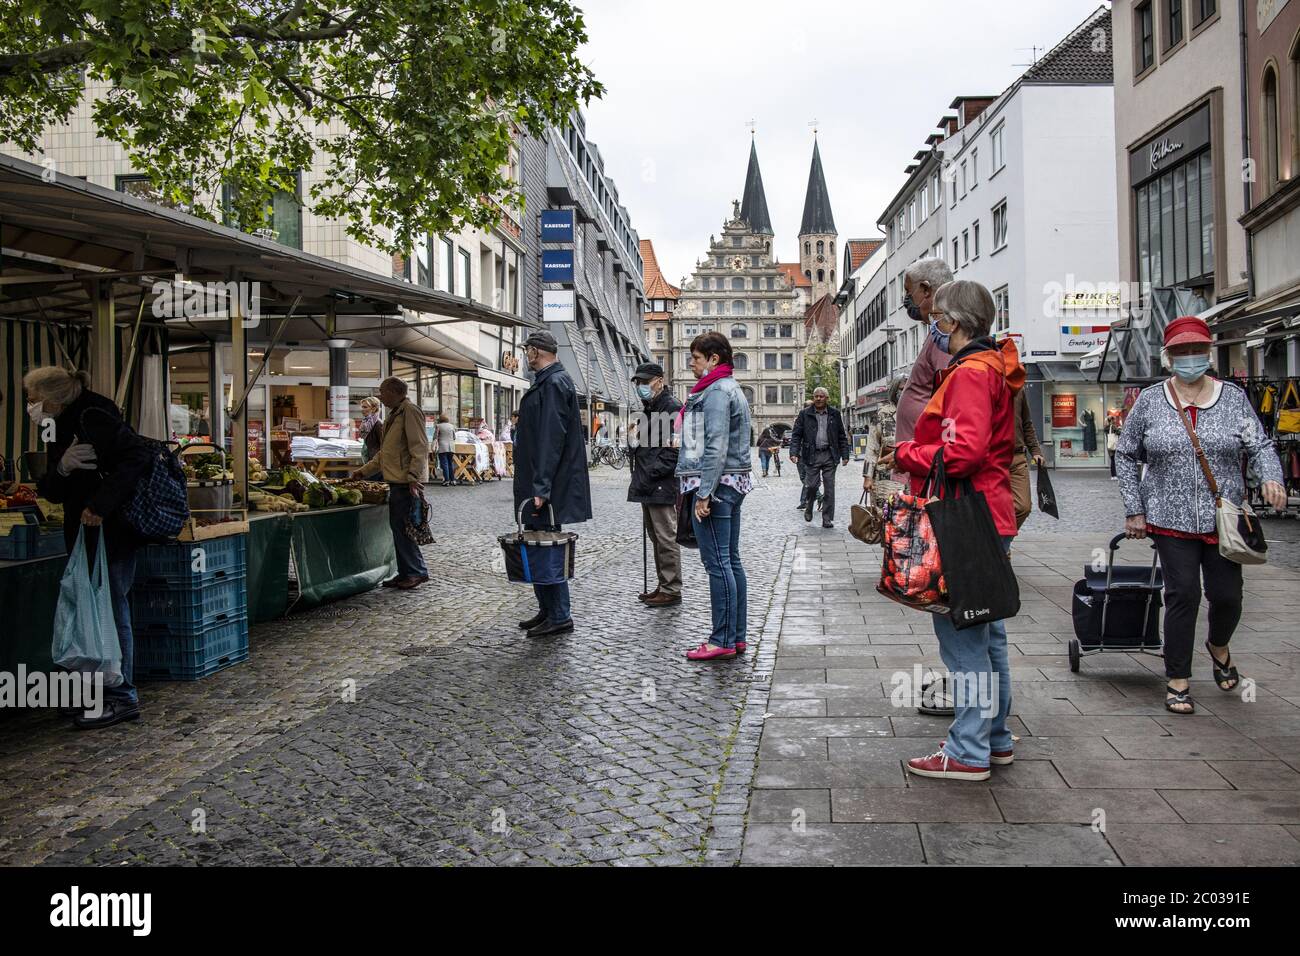 German people going about their everyday lives after the coronavirus lockdown restrictions are relaxed in Braunschweig, north-central Germany Stock Photo